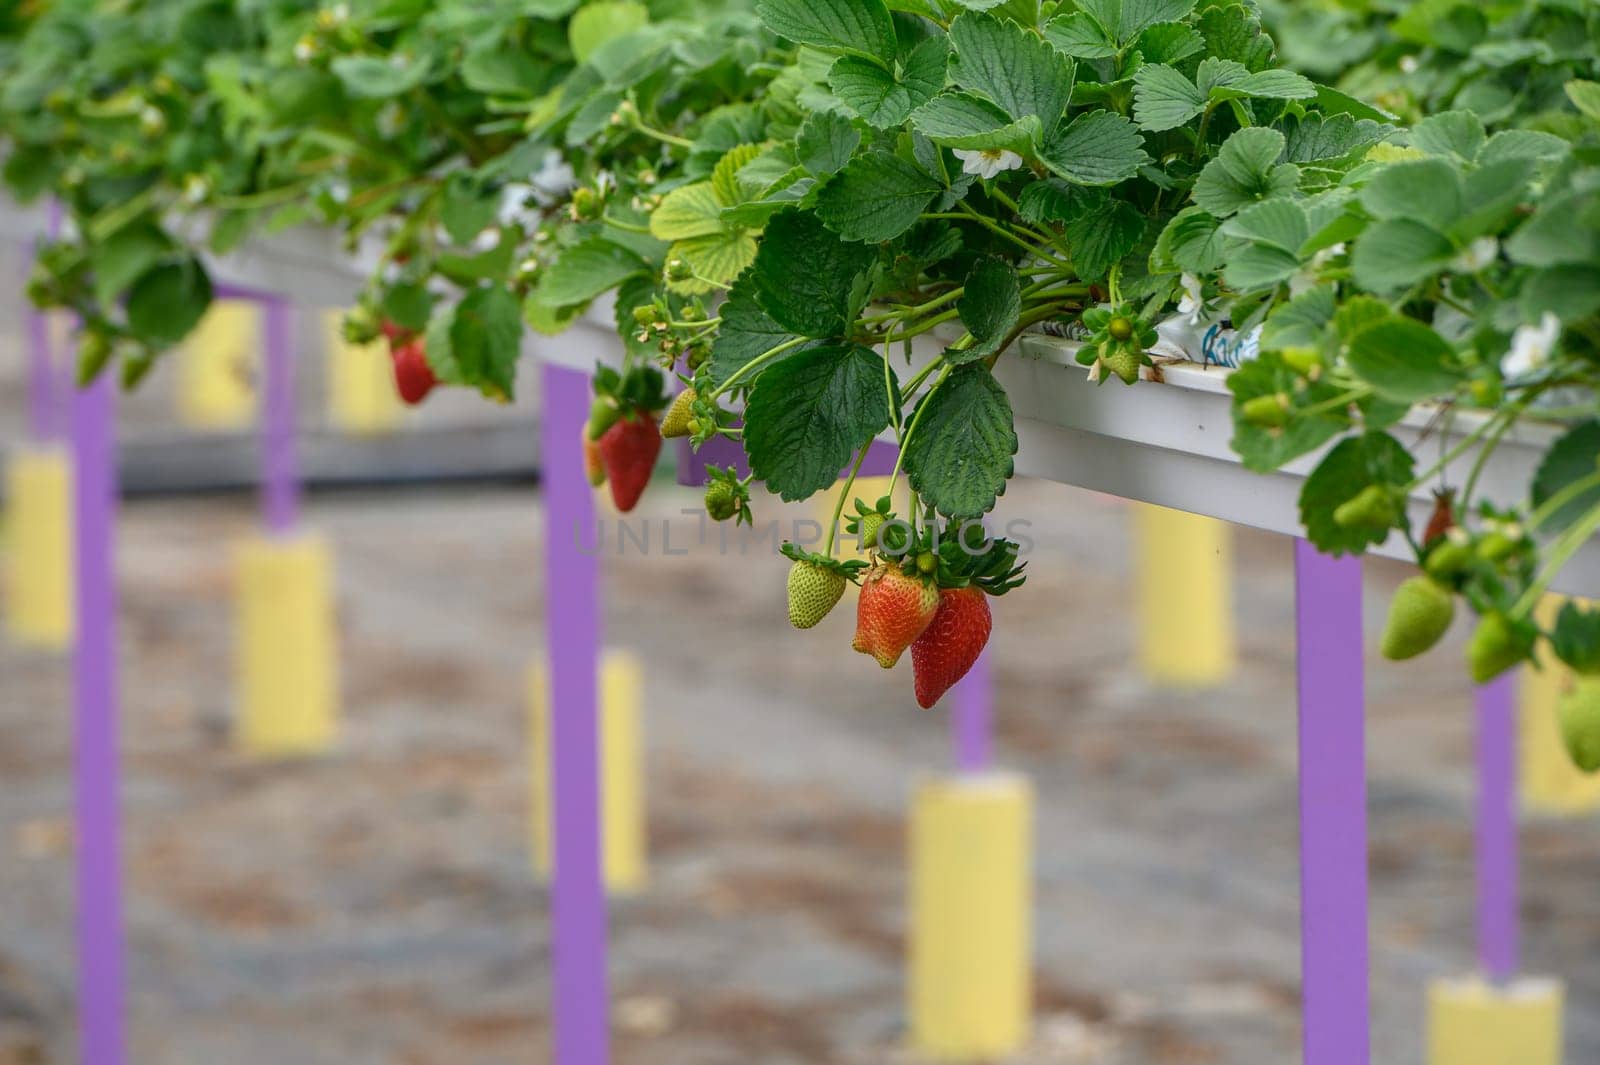 strawberries on hanging beds in a greenhouse